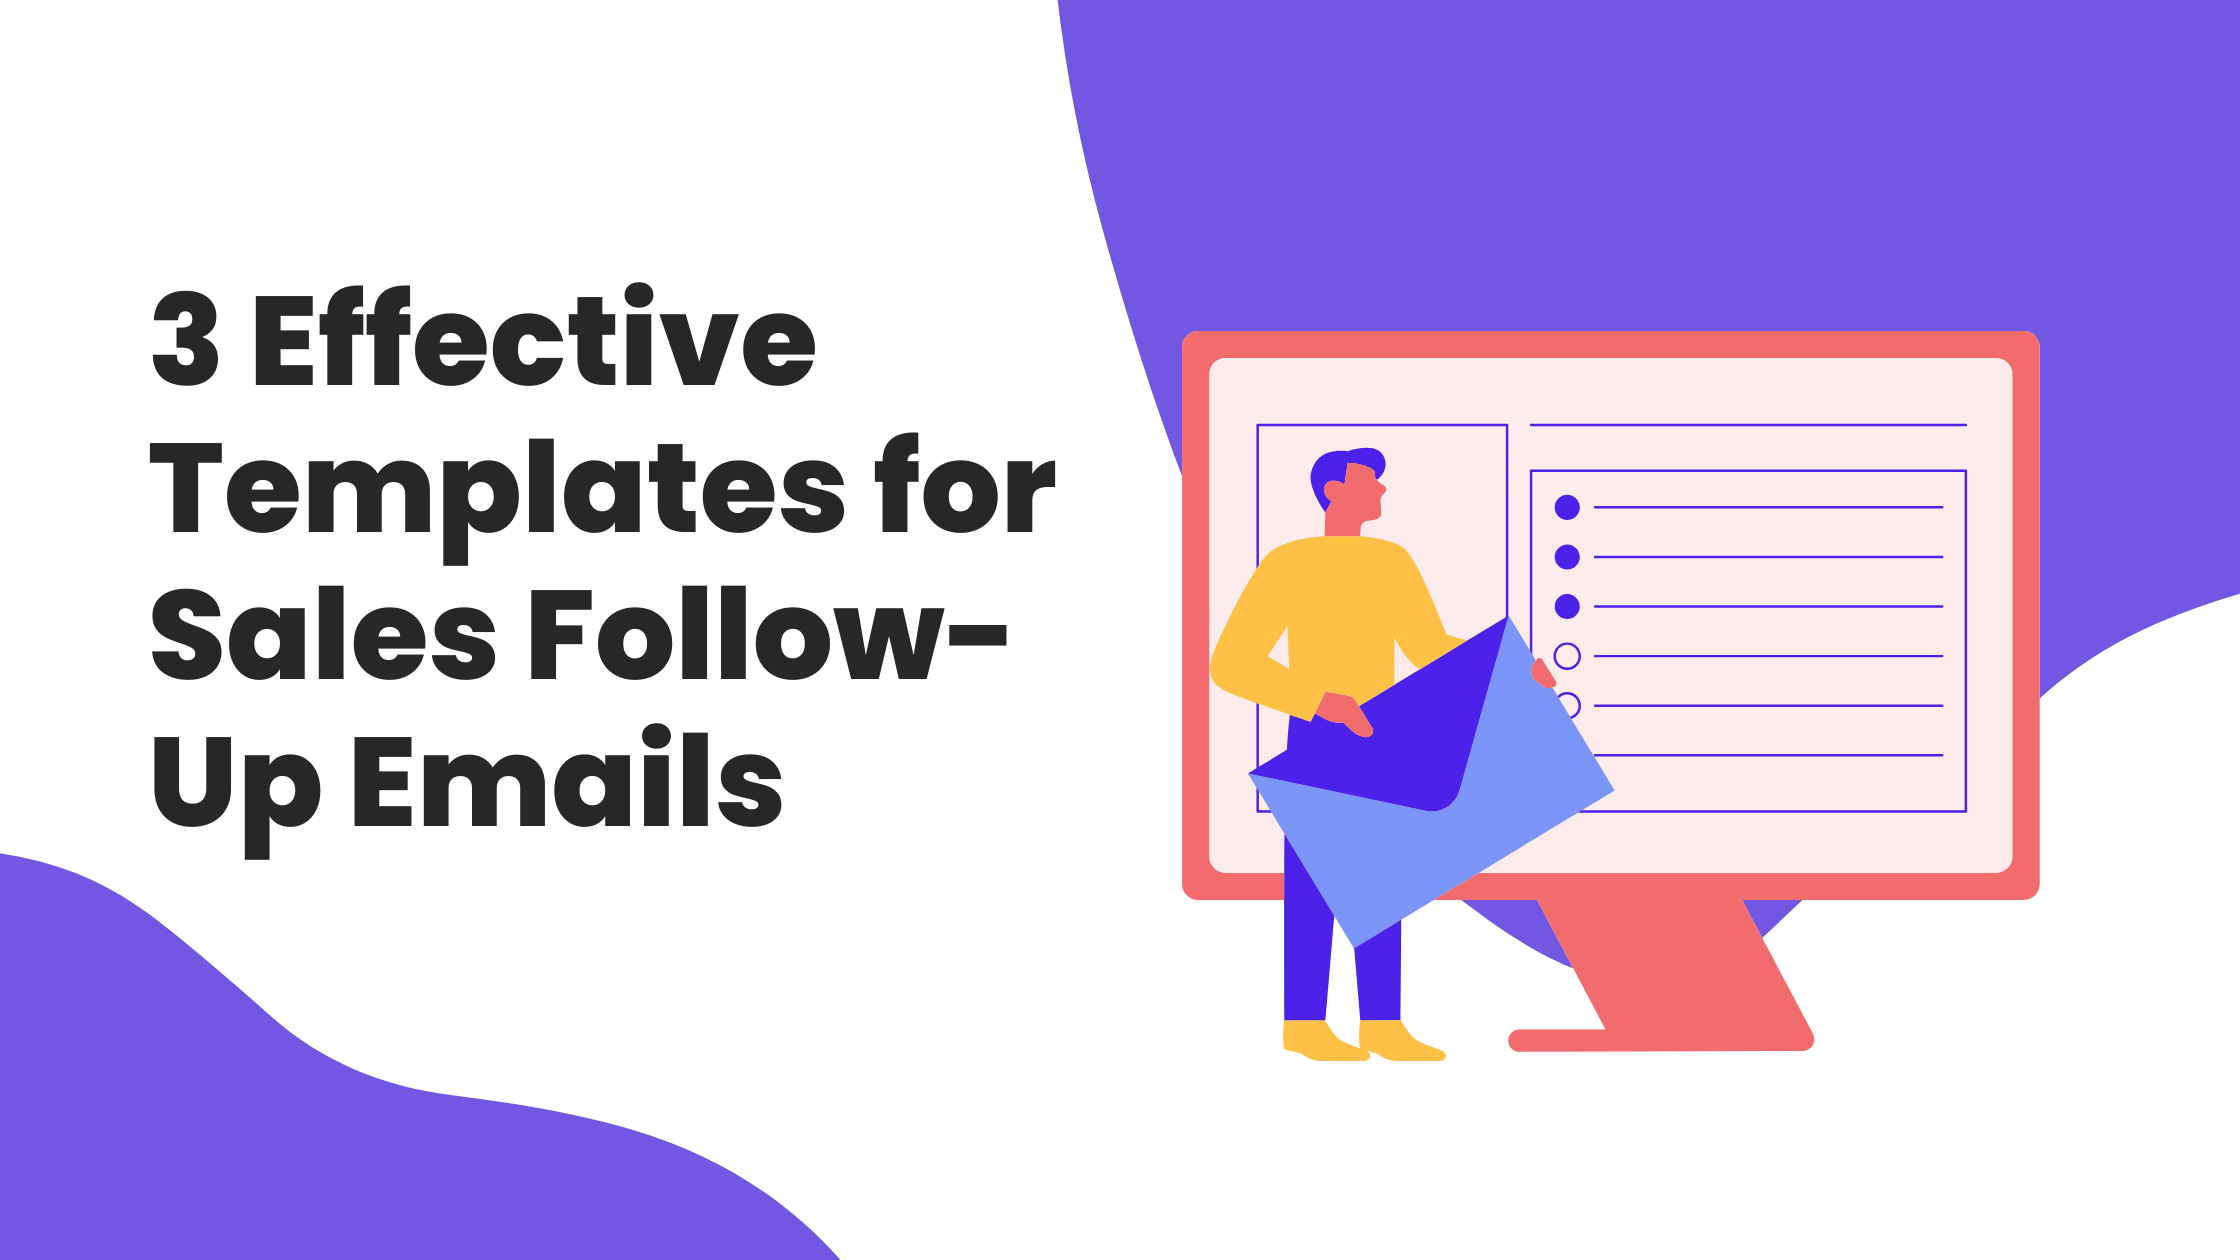 3 Effective Templates for Sales Follow-Up Emails